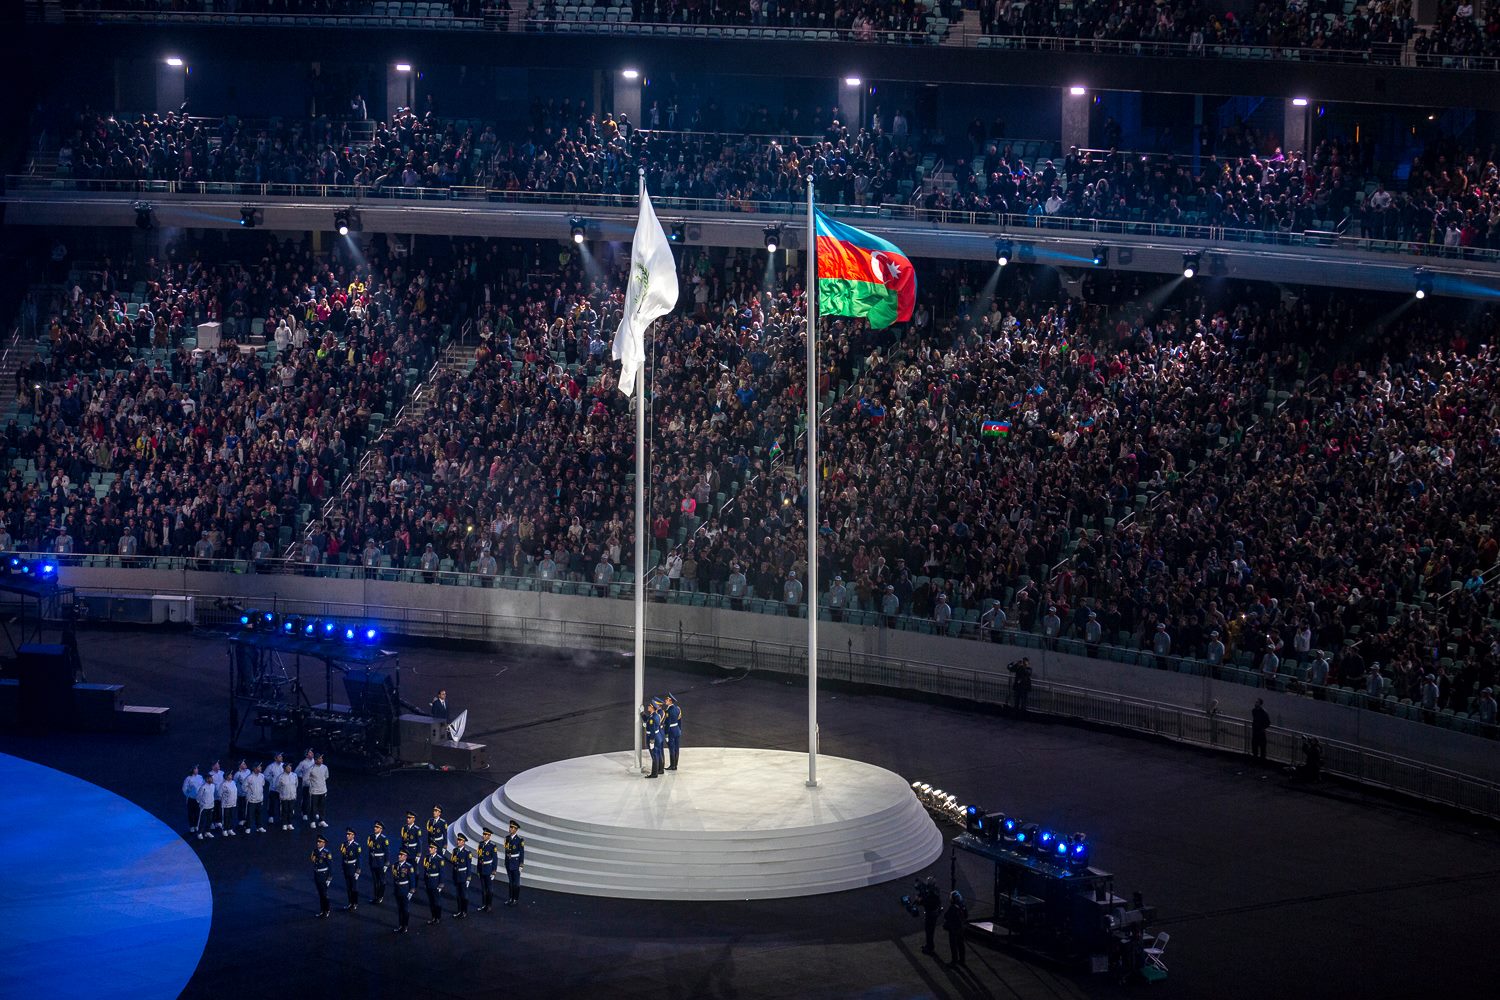 The 4th Islamic Solidarity Games ceremony in Baku